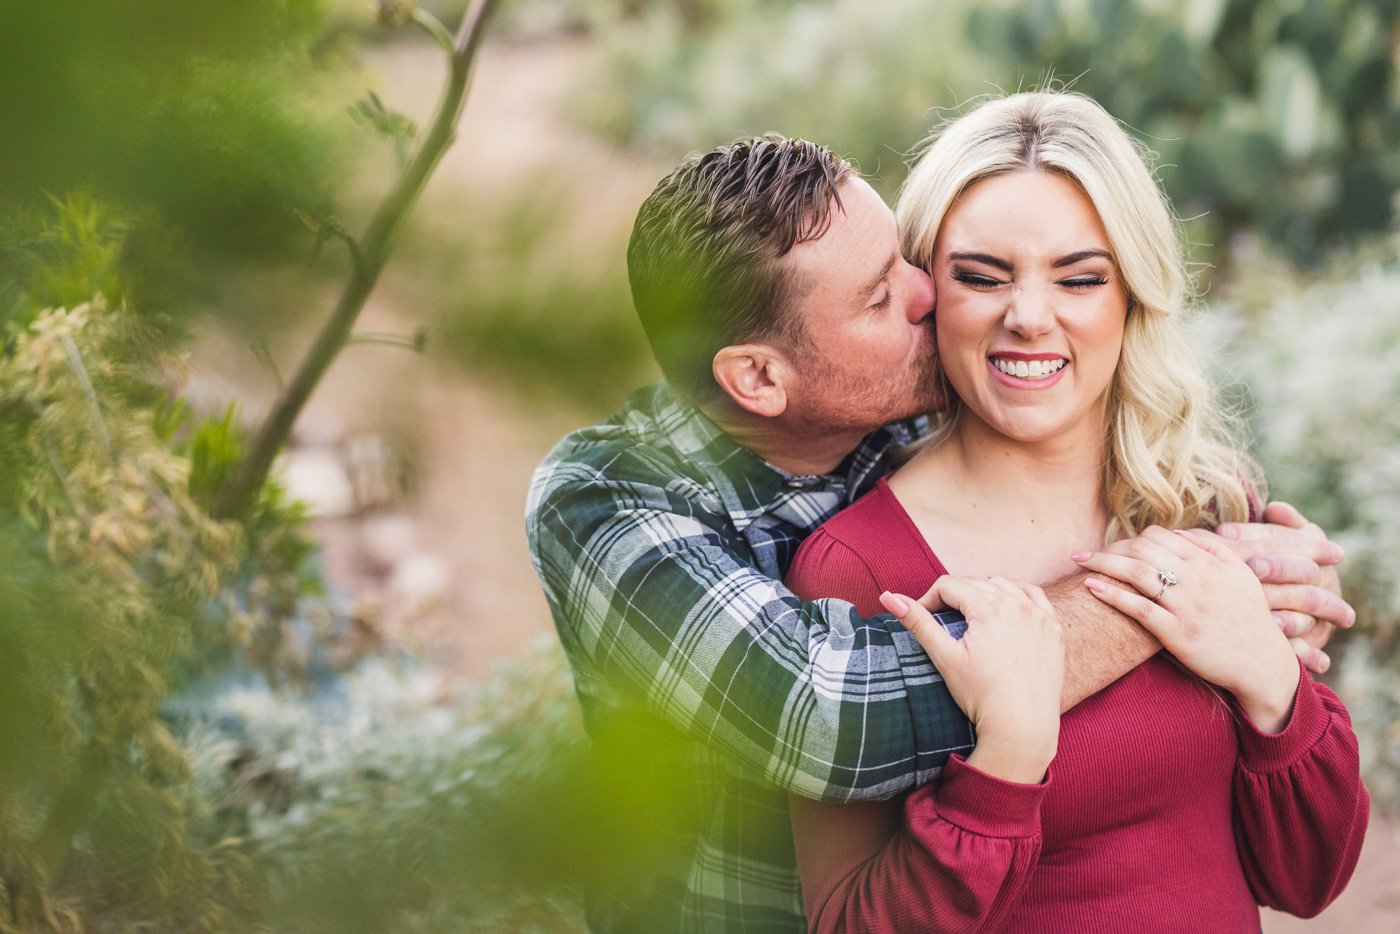 woman smiling while fiance kisses her and squeezes from behind